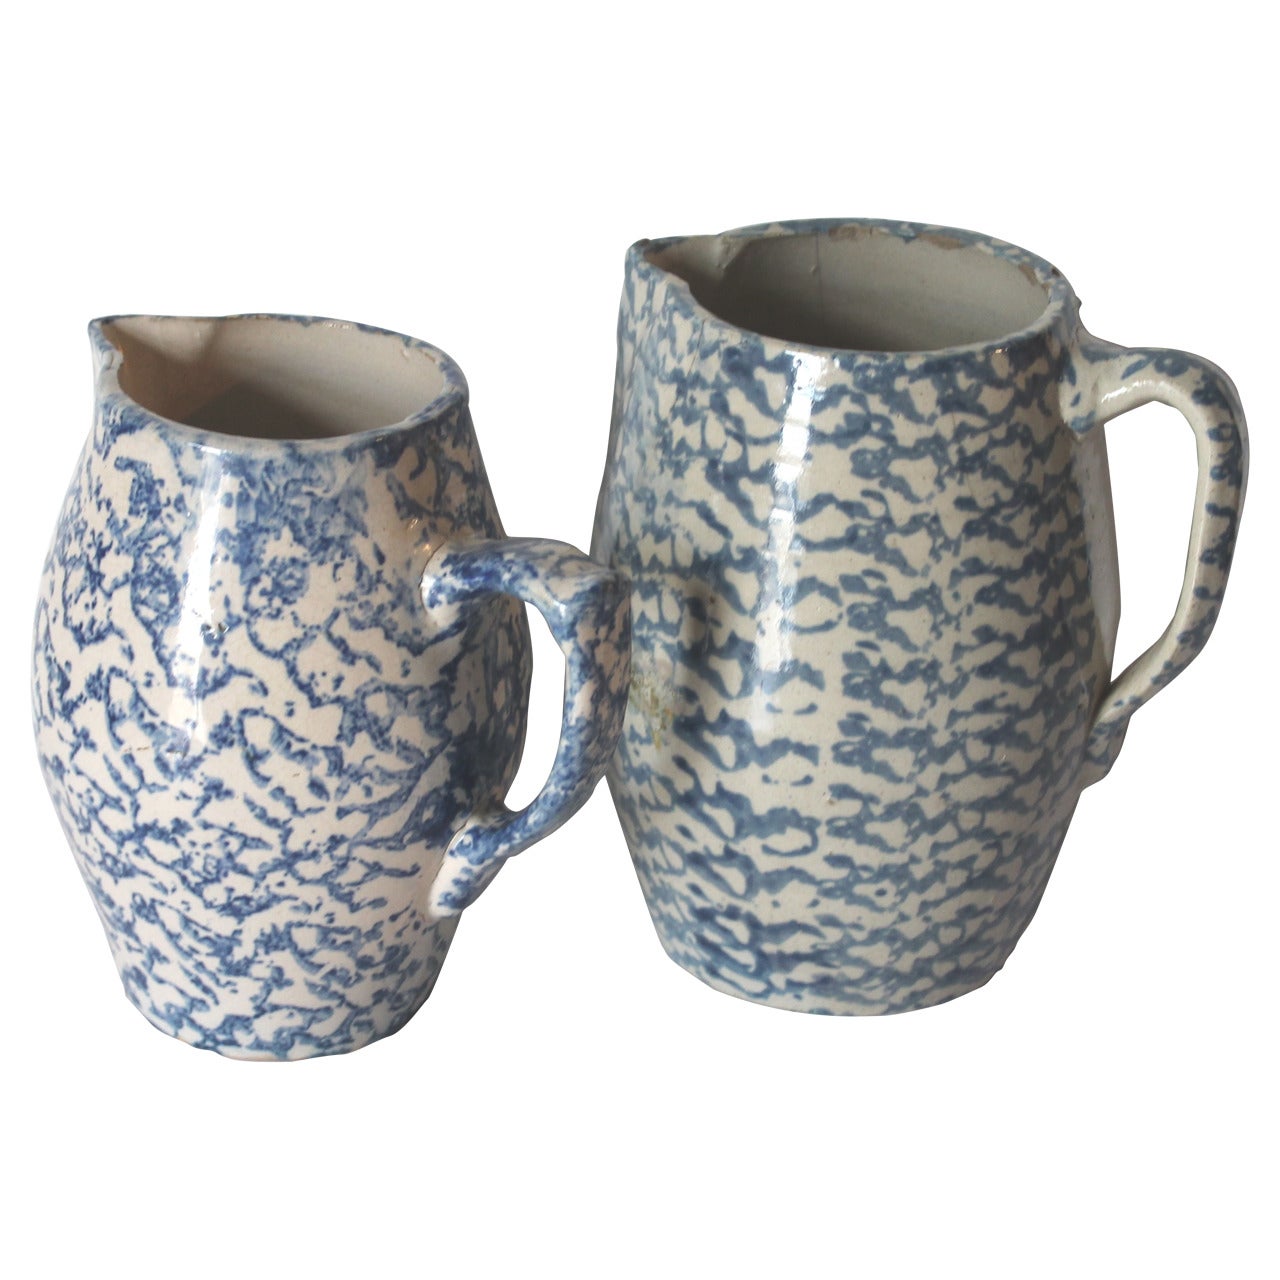 Two 19th Century Rare Form Sponge Ware Pottery Pitchers